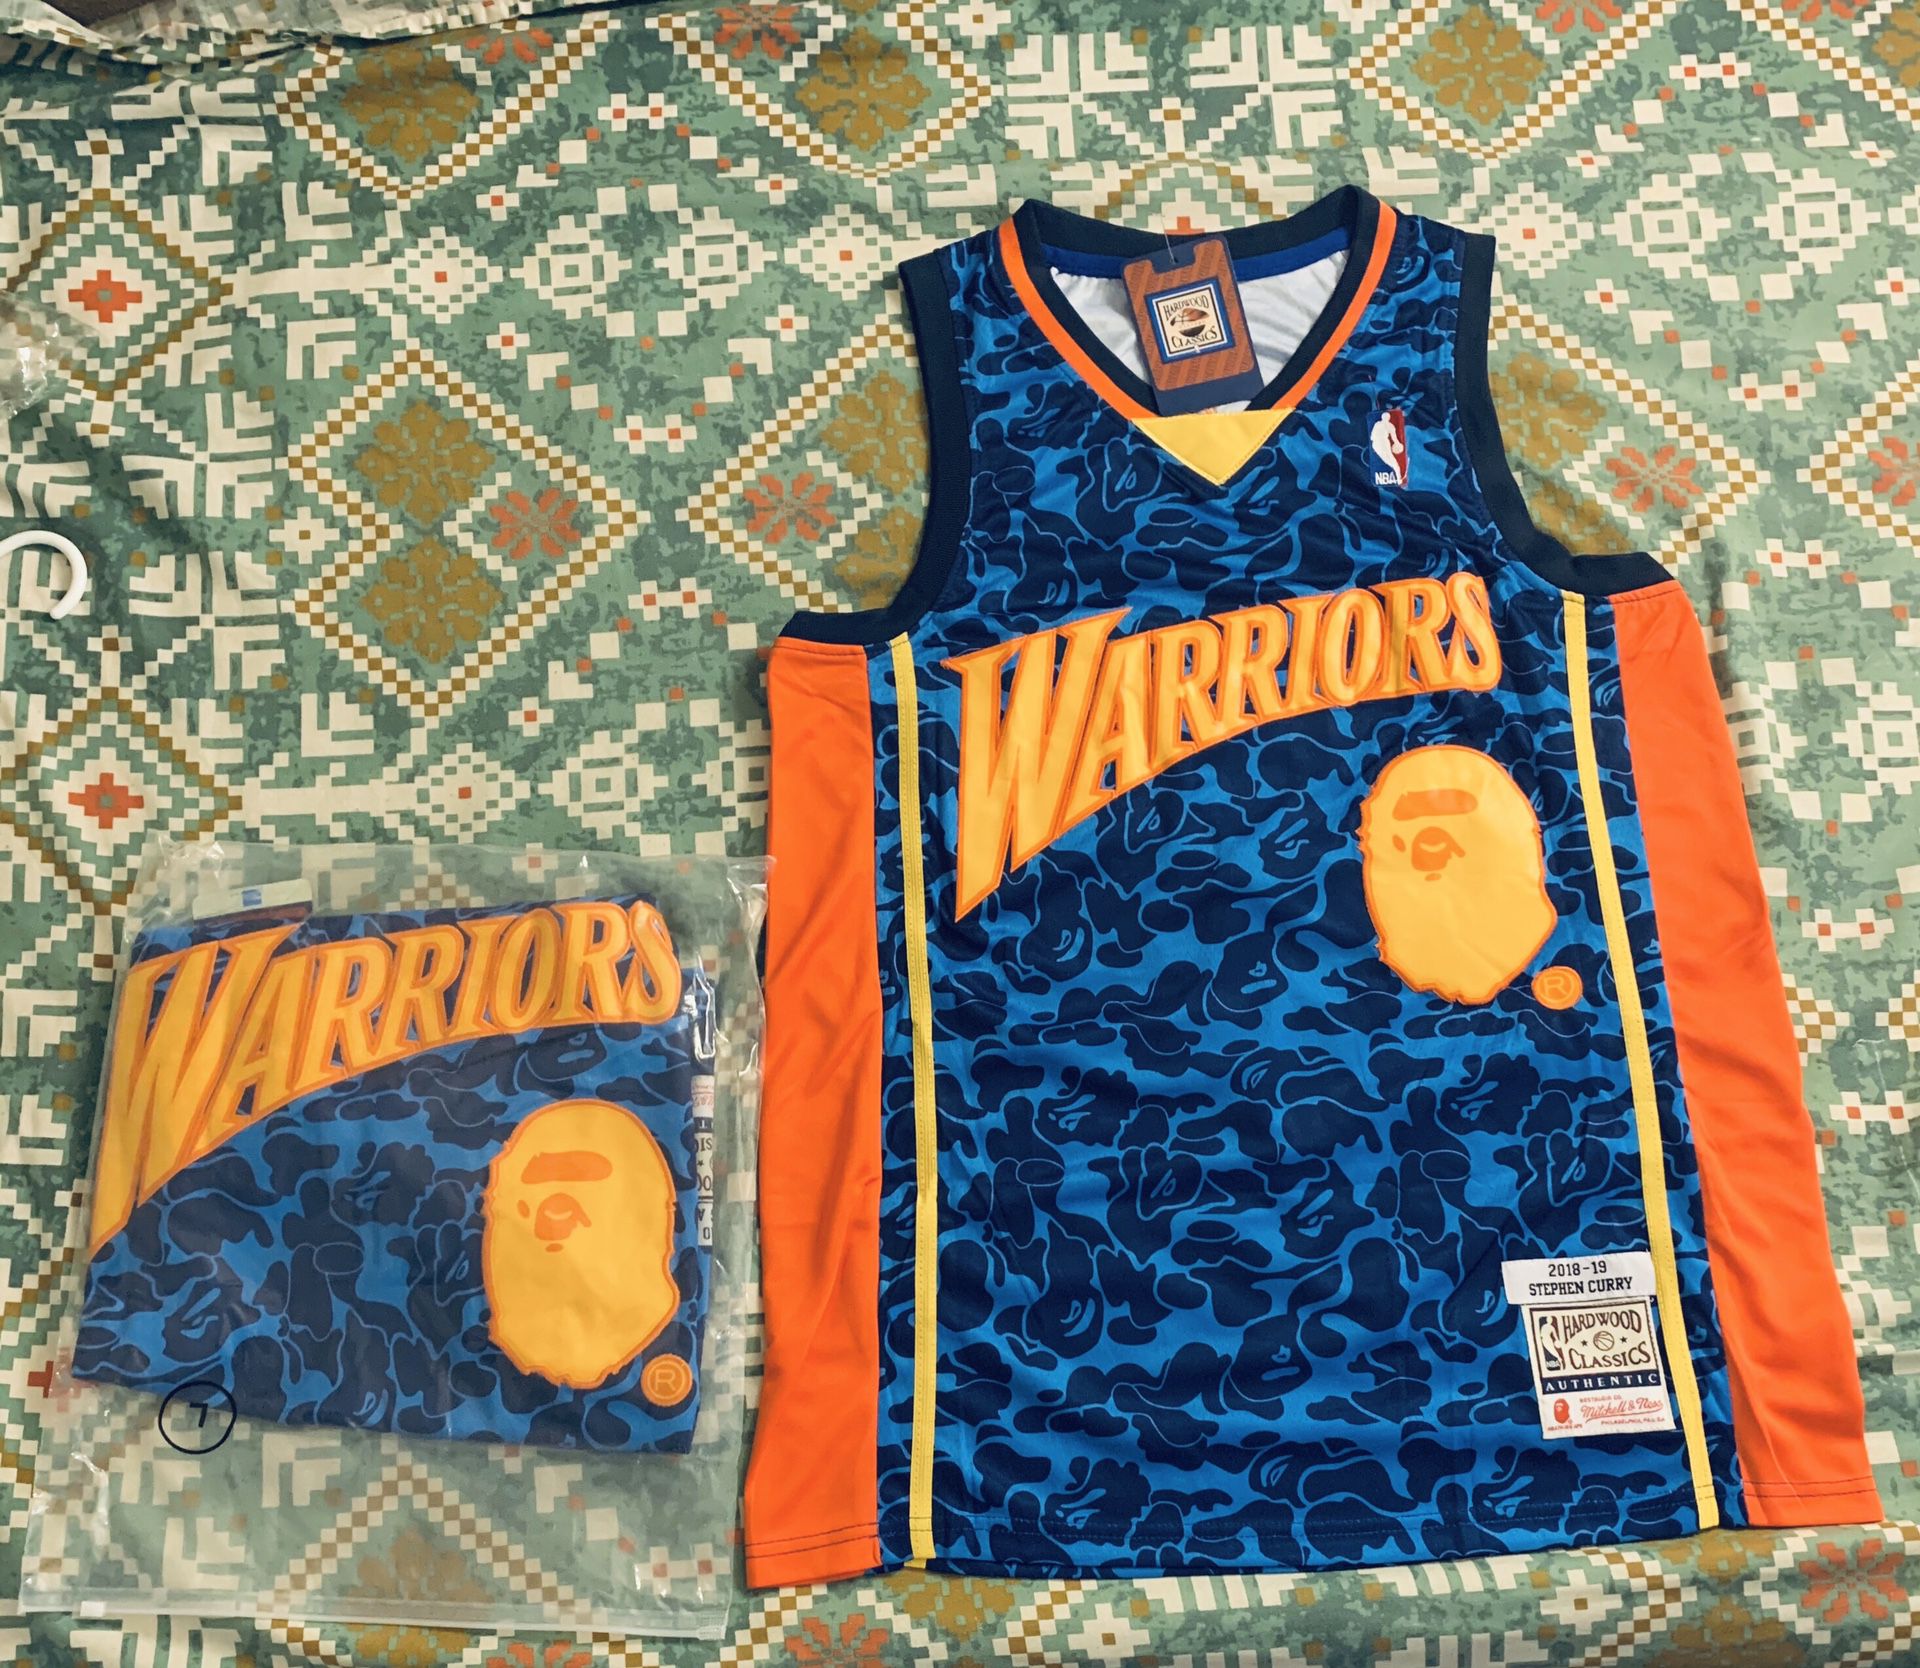 Stephen Curry Jersey Black 30 Large Golden State Warriors City Edition for  Sale in Lake Elsinore, CA - OfferUp